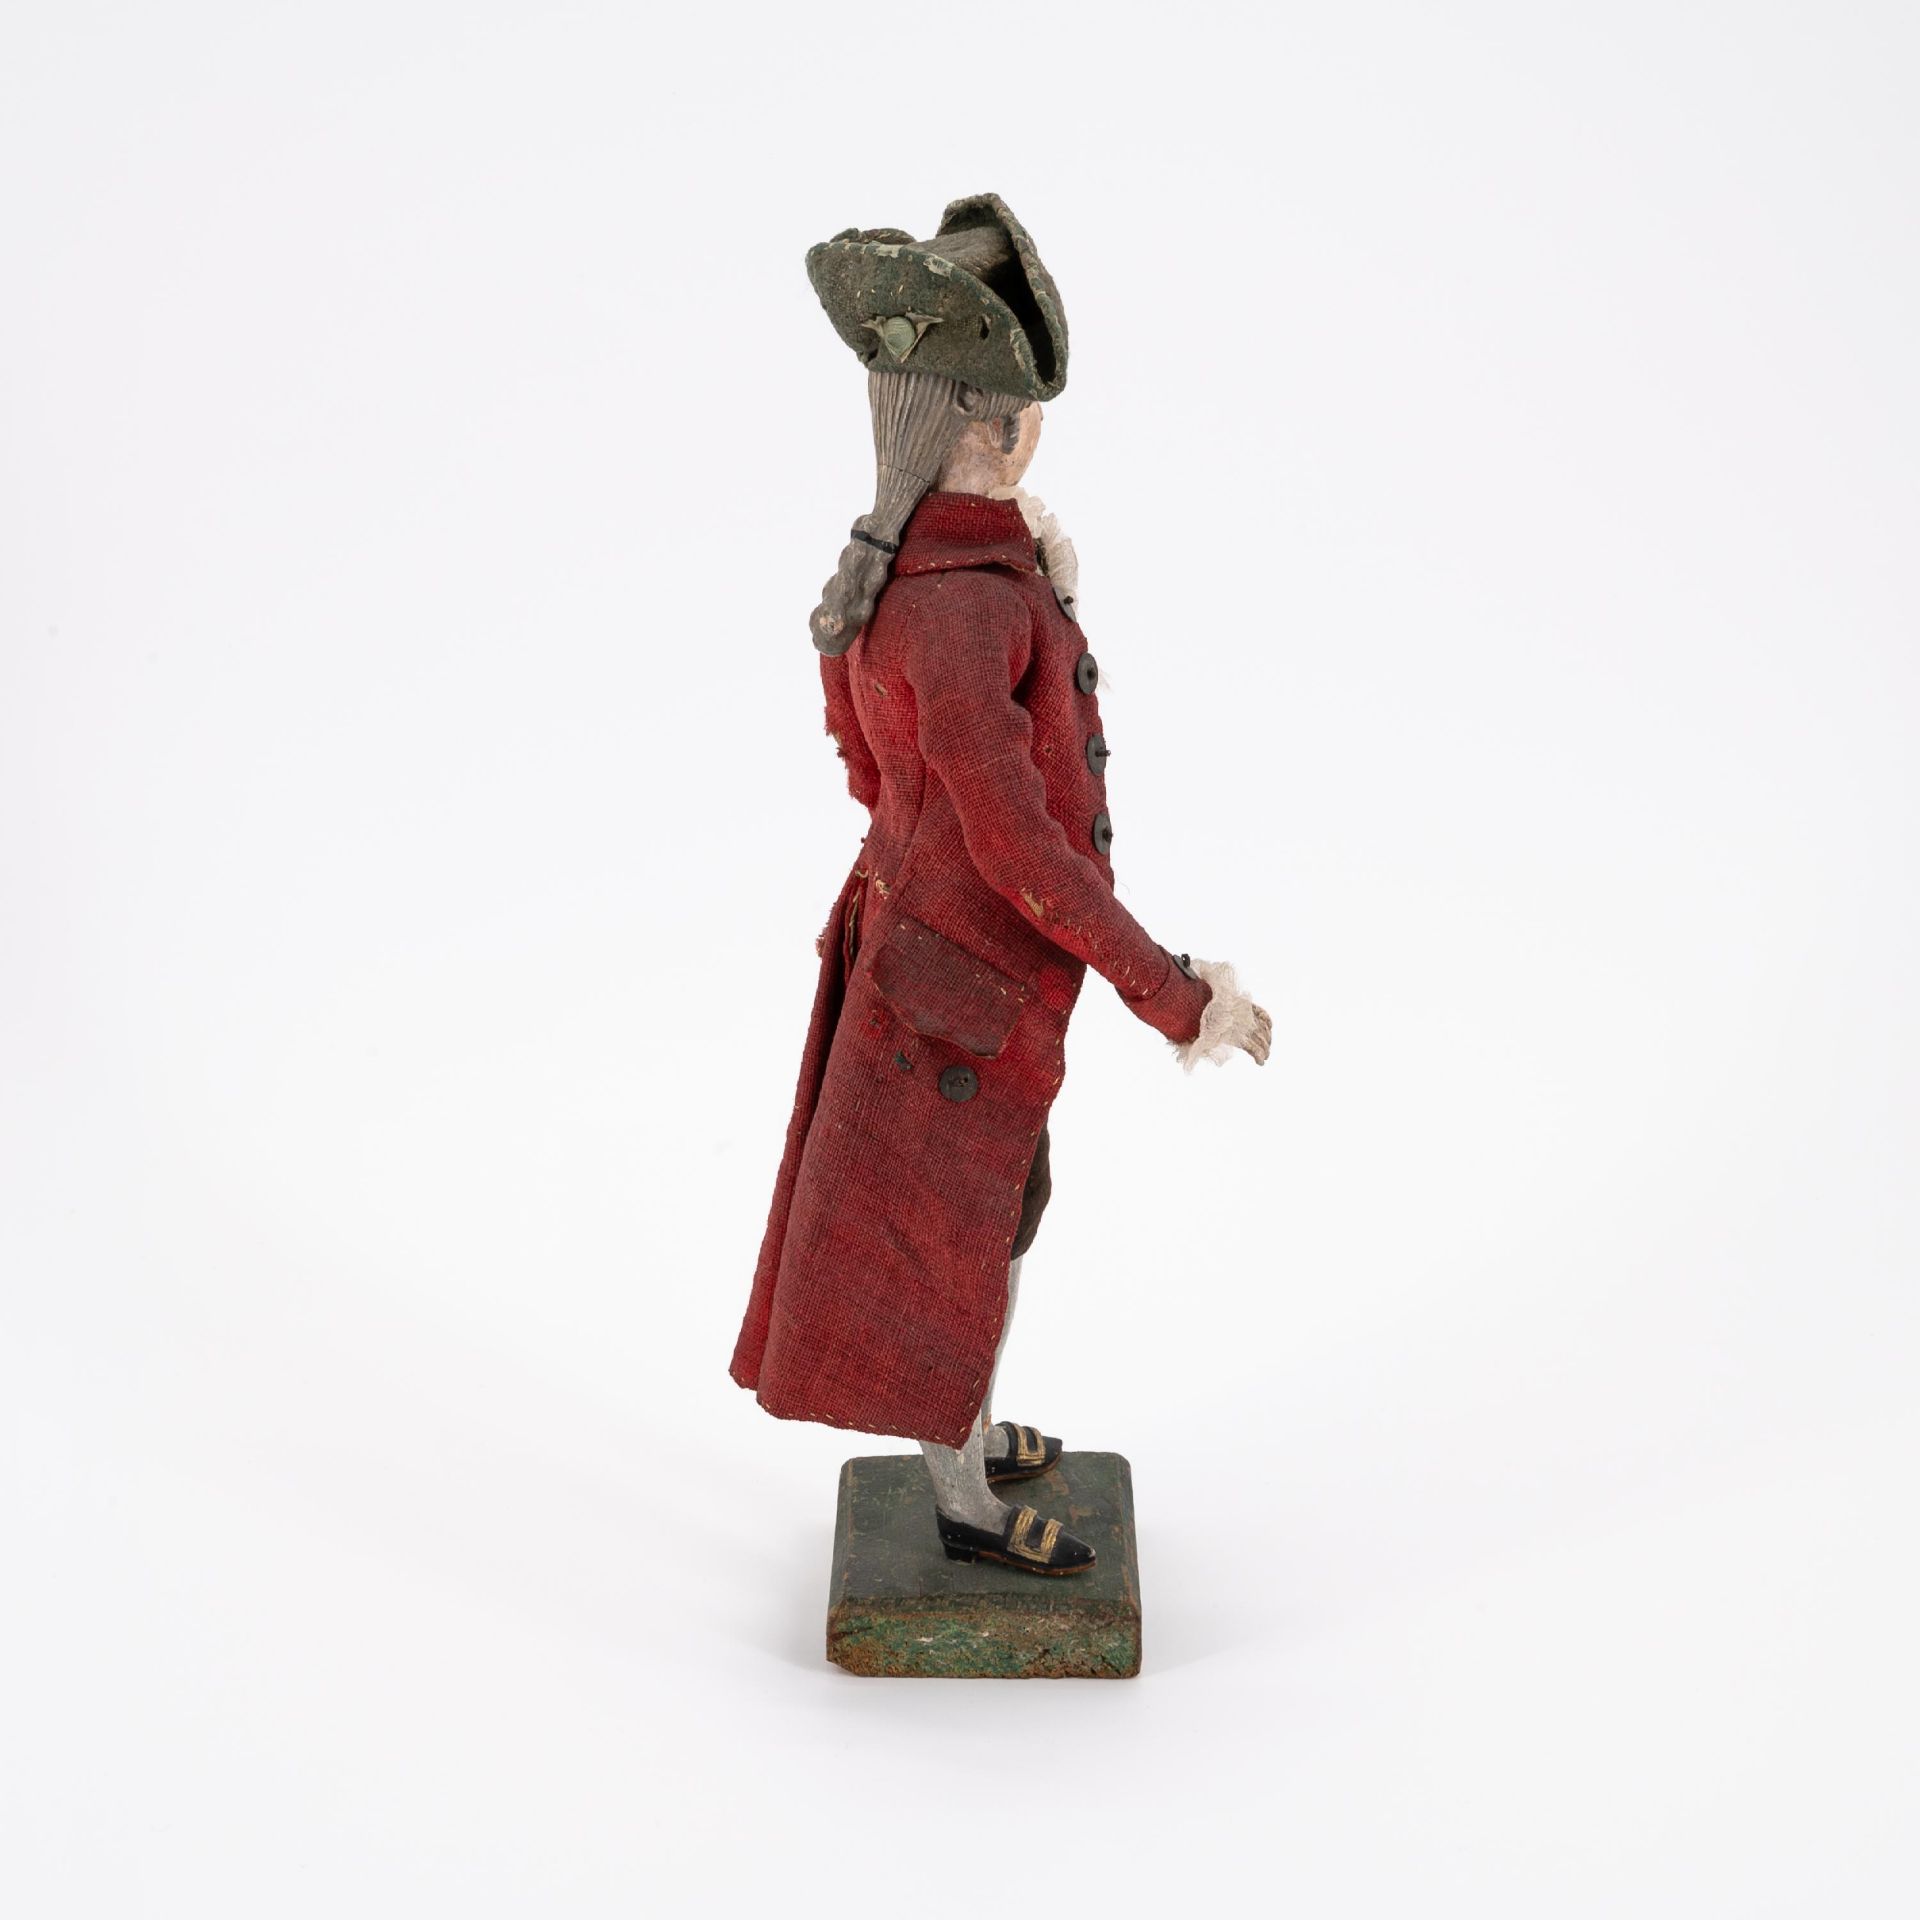 MODEL FIGURINE OF A GALLANT GENTLEMAN MADE OF WOOD, WOOL, VELVET, SILK, GOLDEN TRIMMINGS AND SILVER - Image 4 of 5